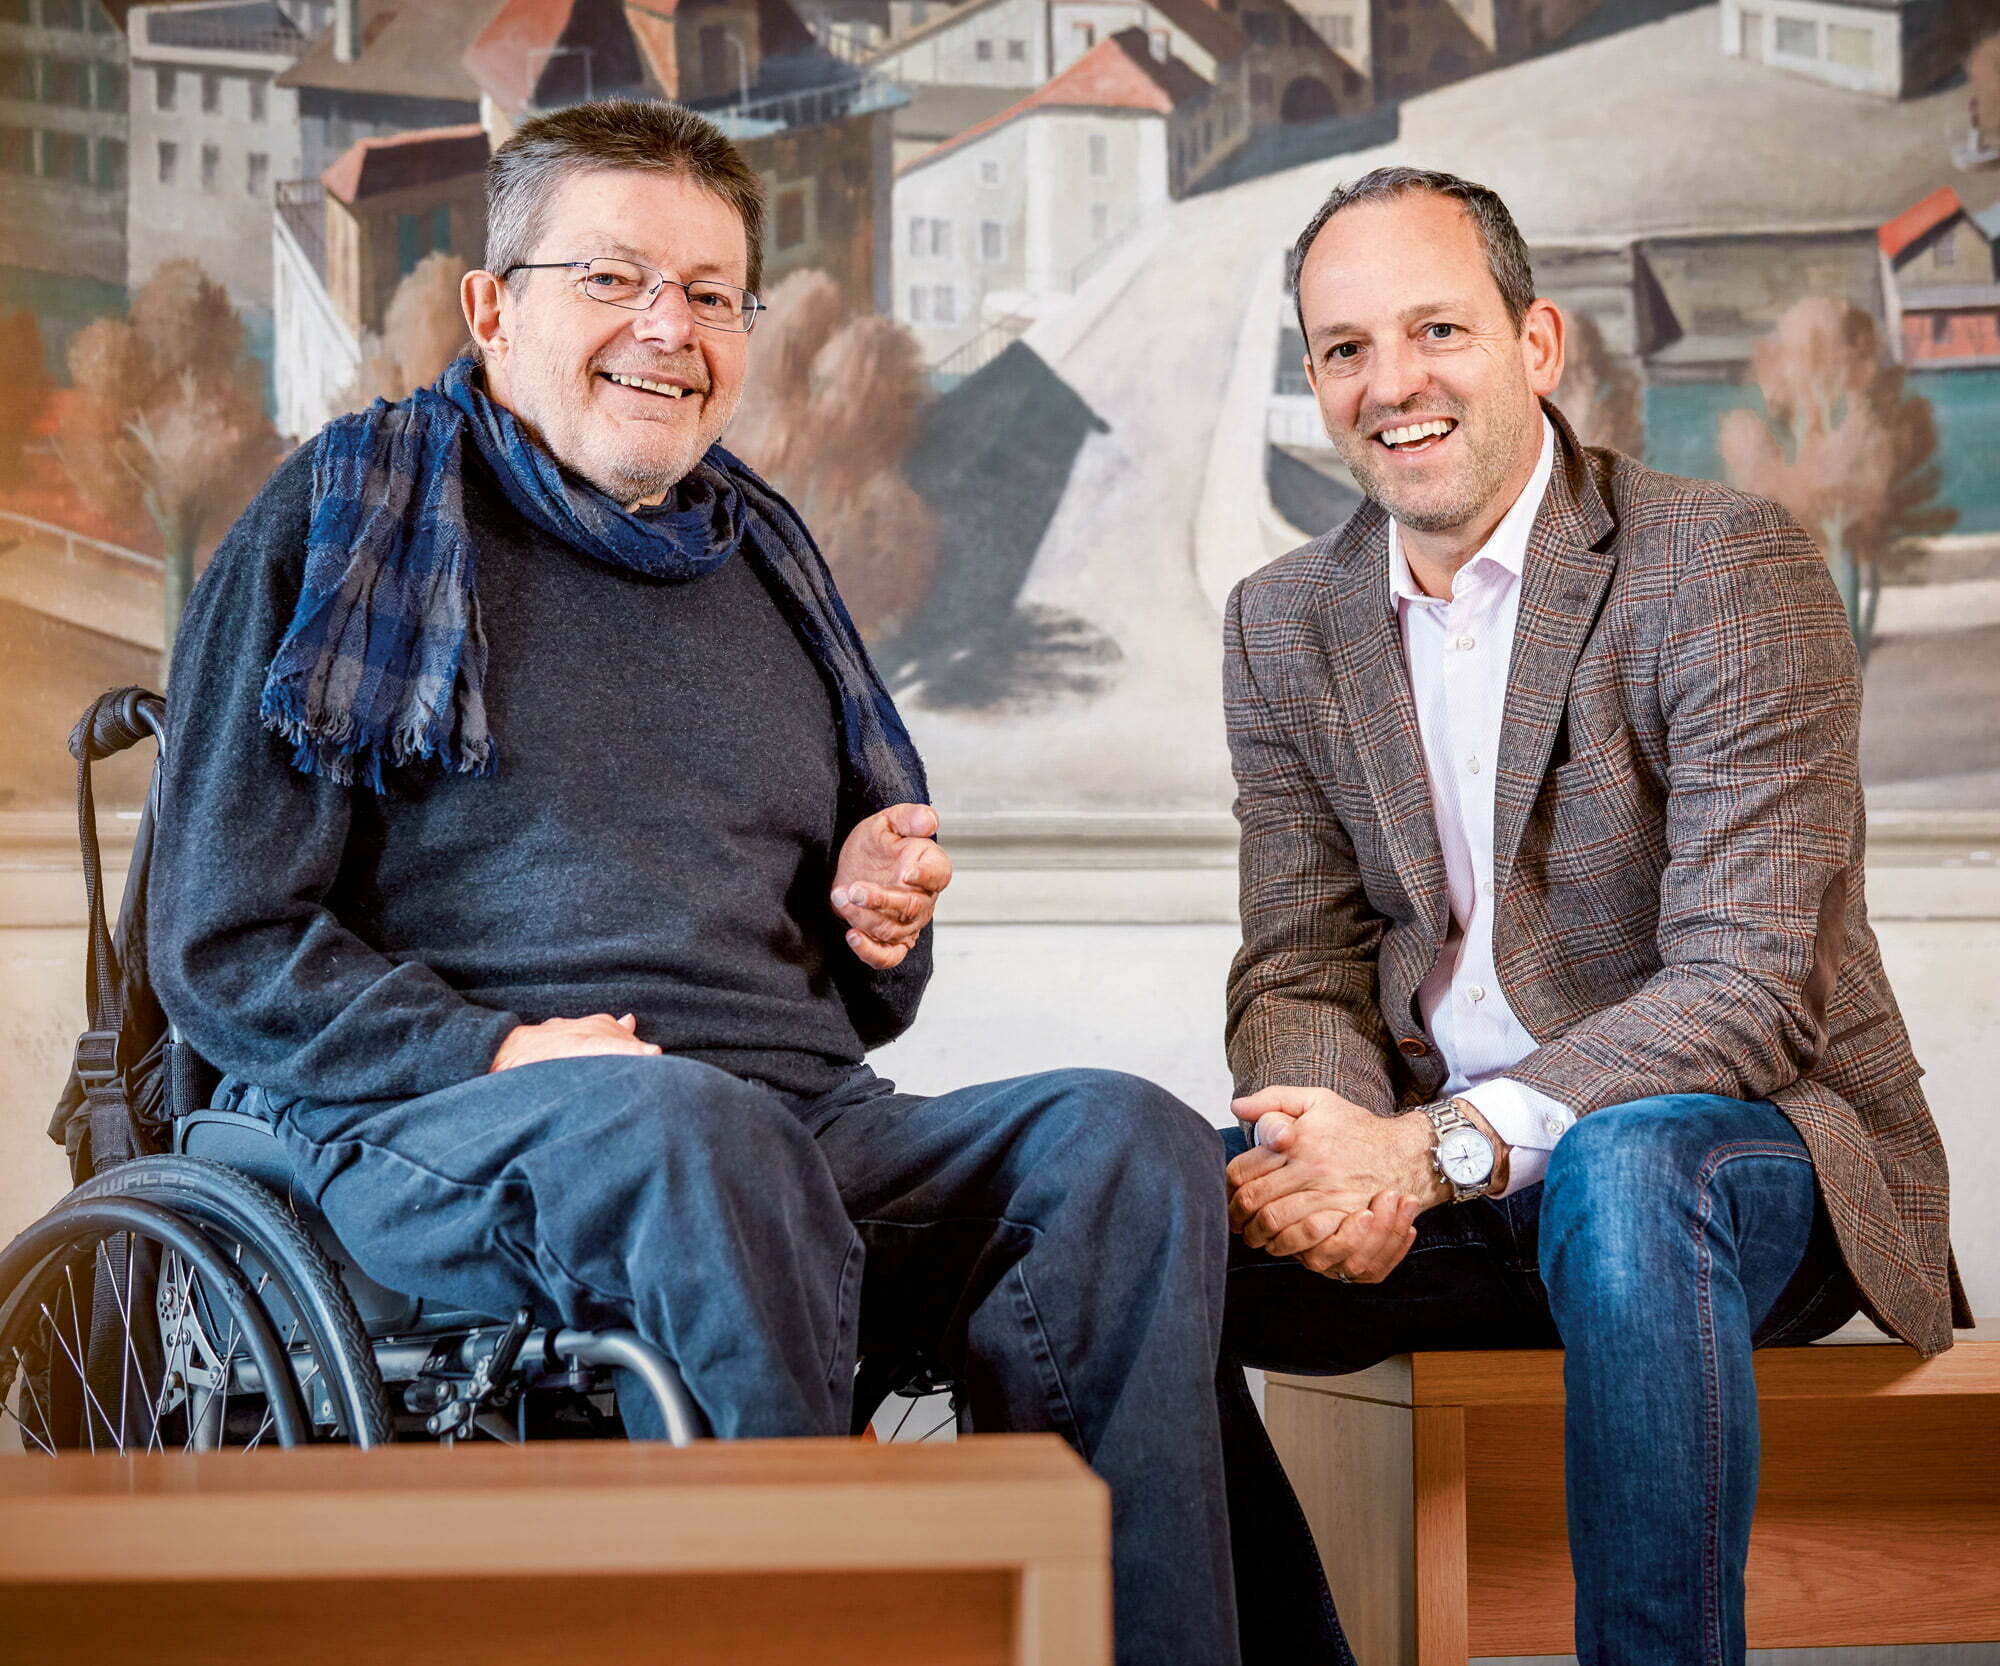 ETH Zurich Foundation, Anything that helps people with  disabilities helps everyone